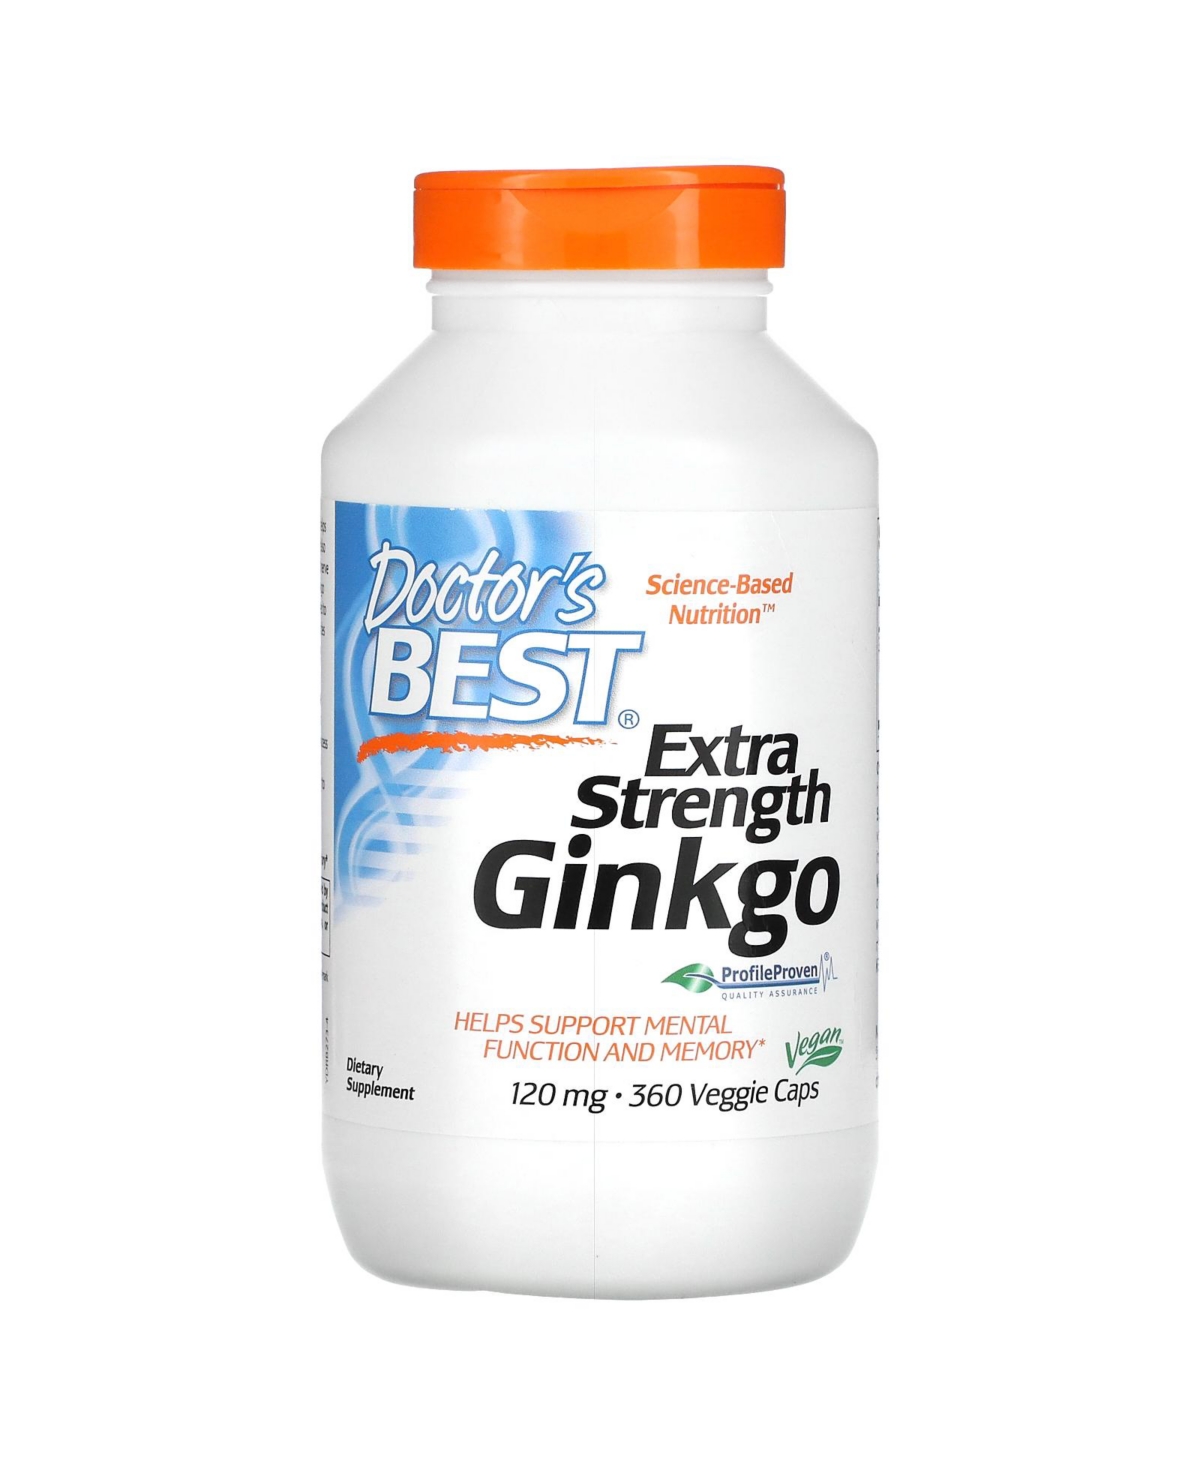 Extra Strength Ginkgo, 120 mg, 360 Veggie Caps, Herbal Supplements - Assorted Pre-Pack